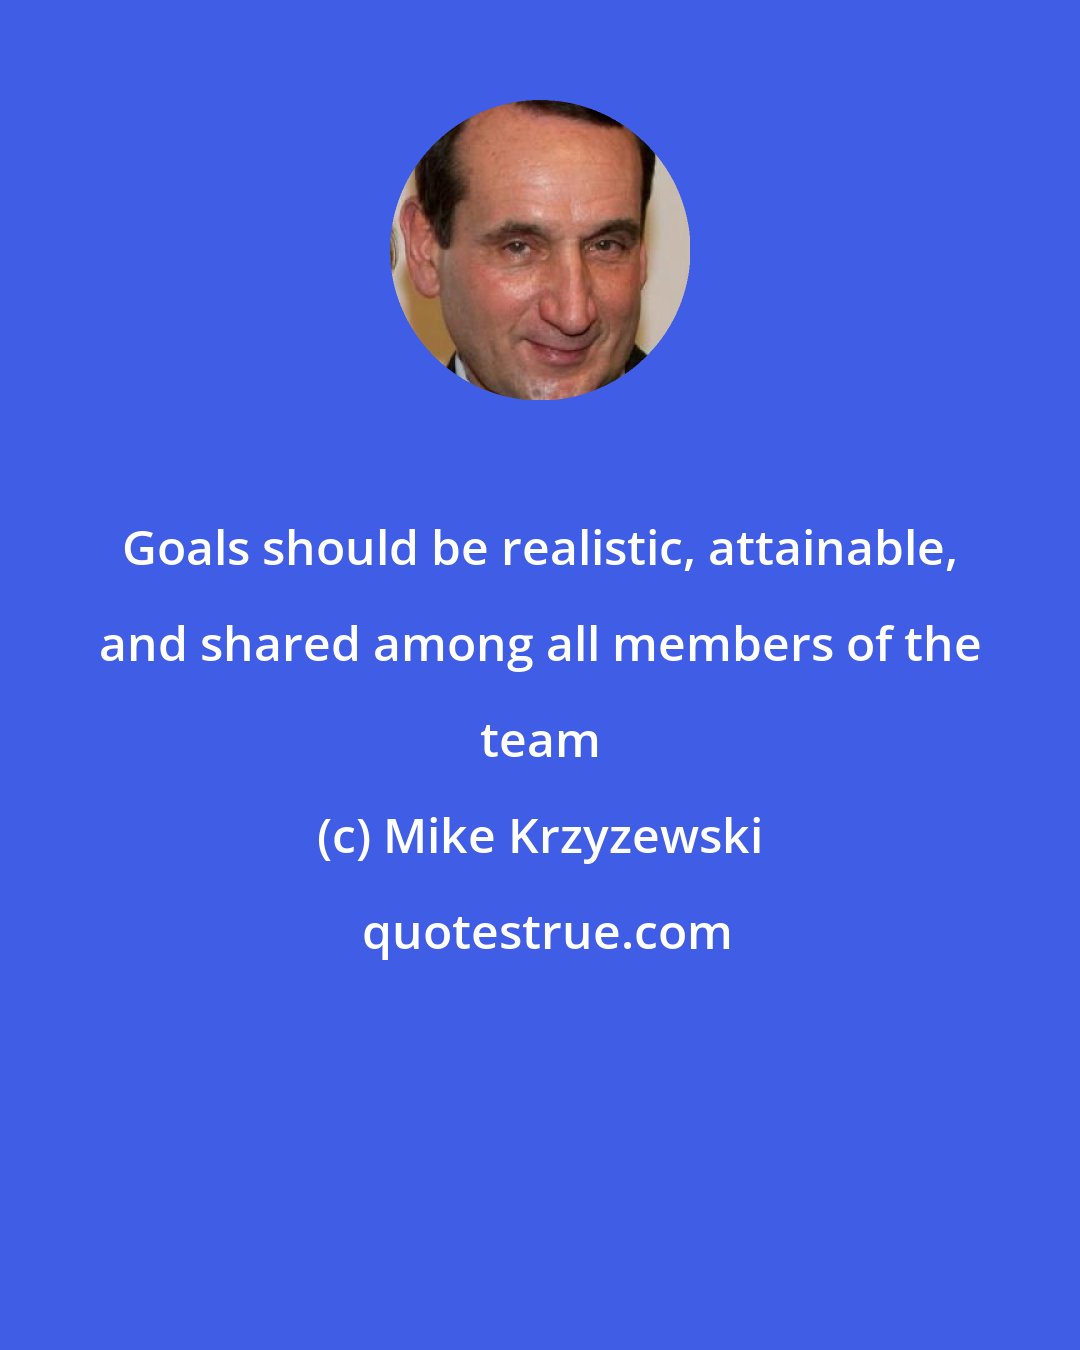 Mike Krzyzewski: Goals should be realistic, attainable, and shared among all members of the team